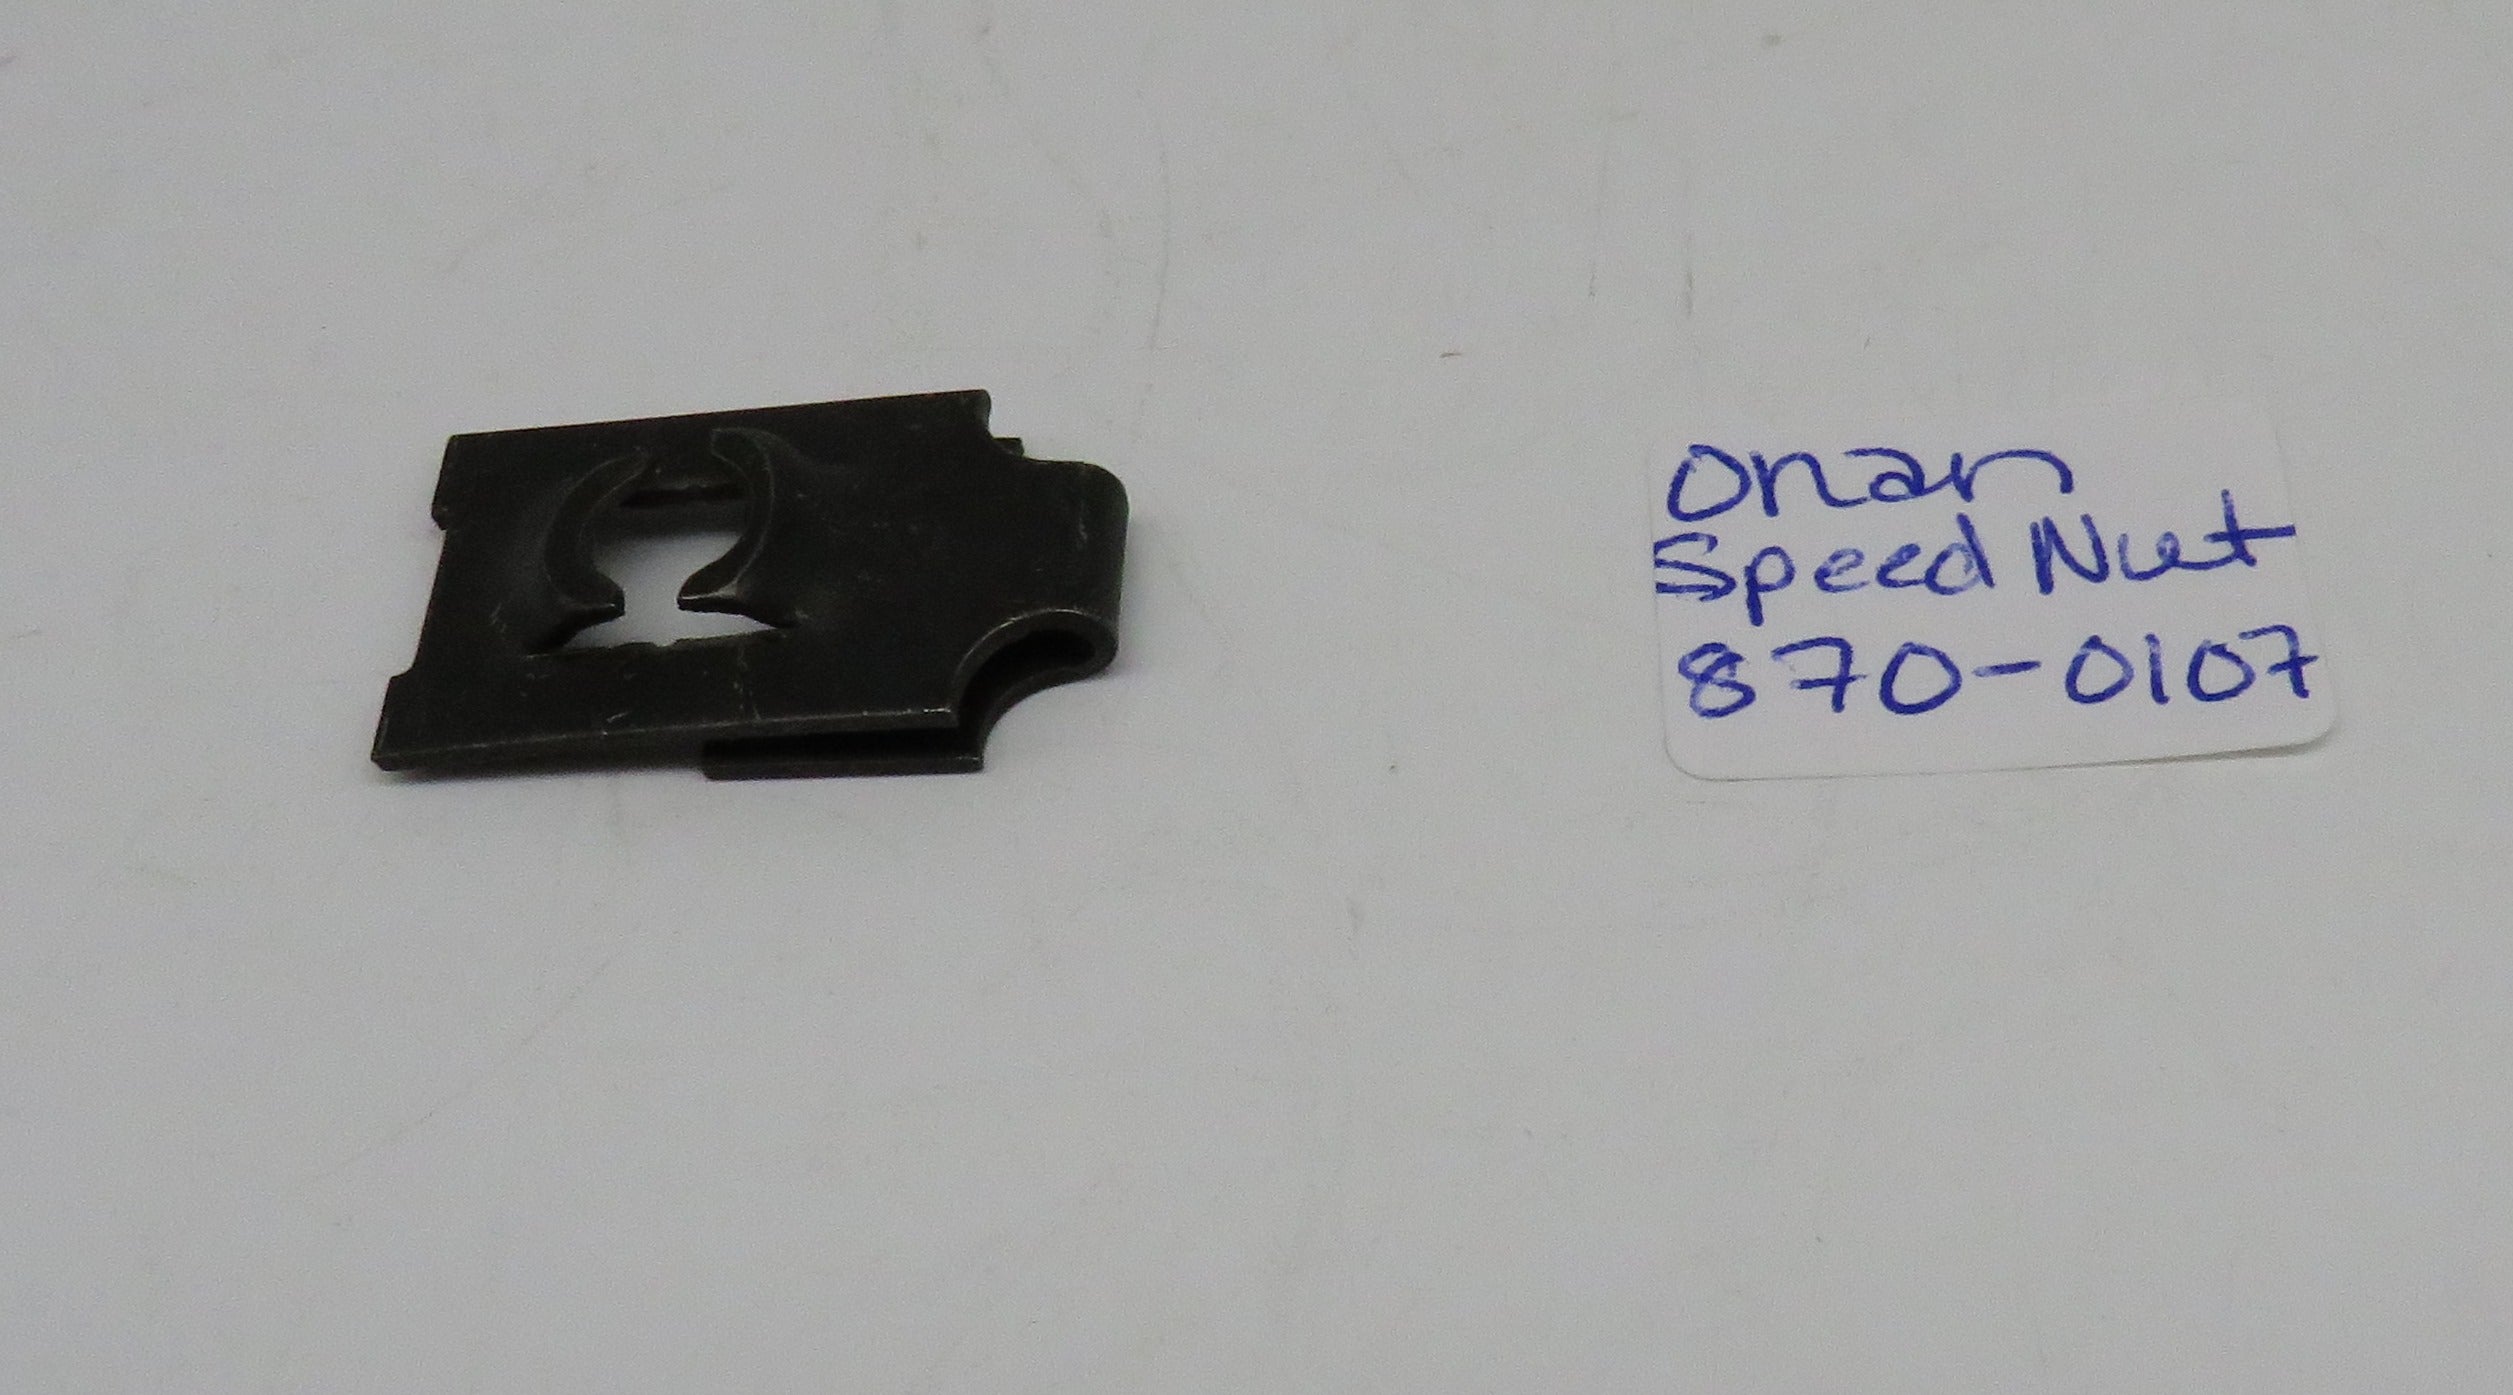 870-0107 Onan Speed Nut (OBSOLETE) For MDJE Gen Set 6.0 & 7.5 kW and For NH Genset (Spec A-R) 